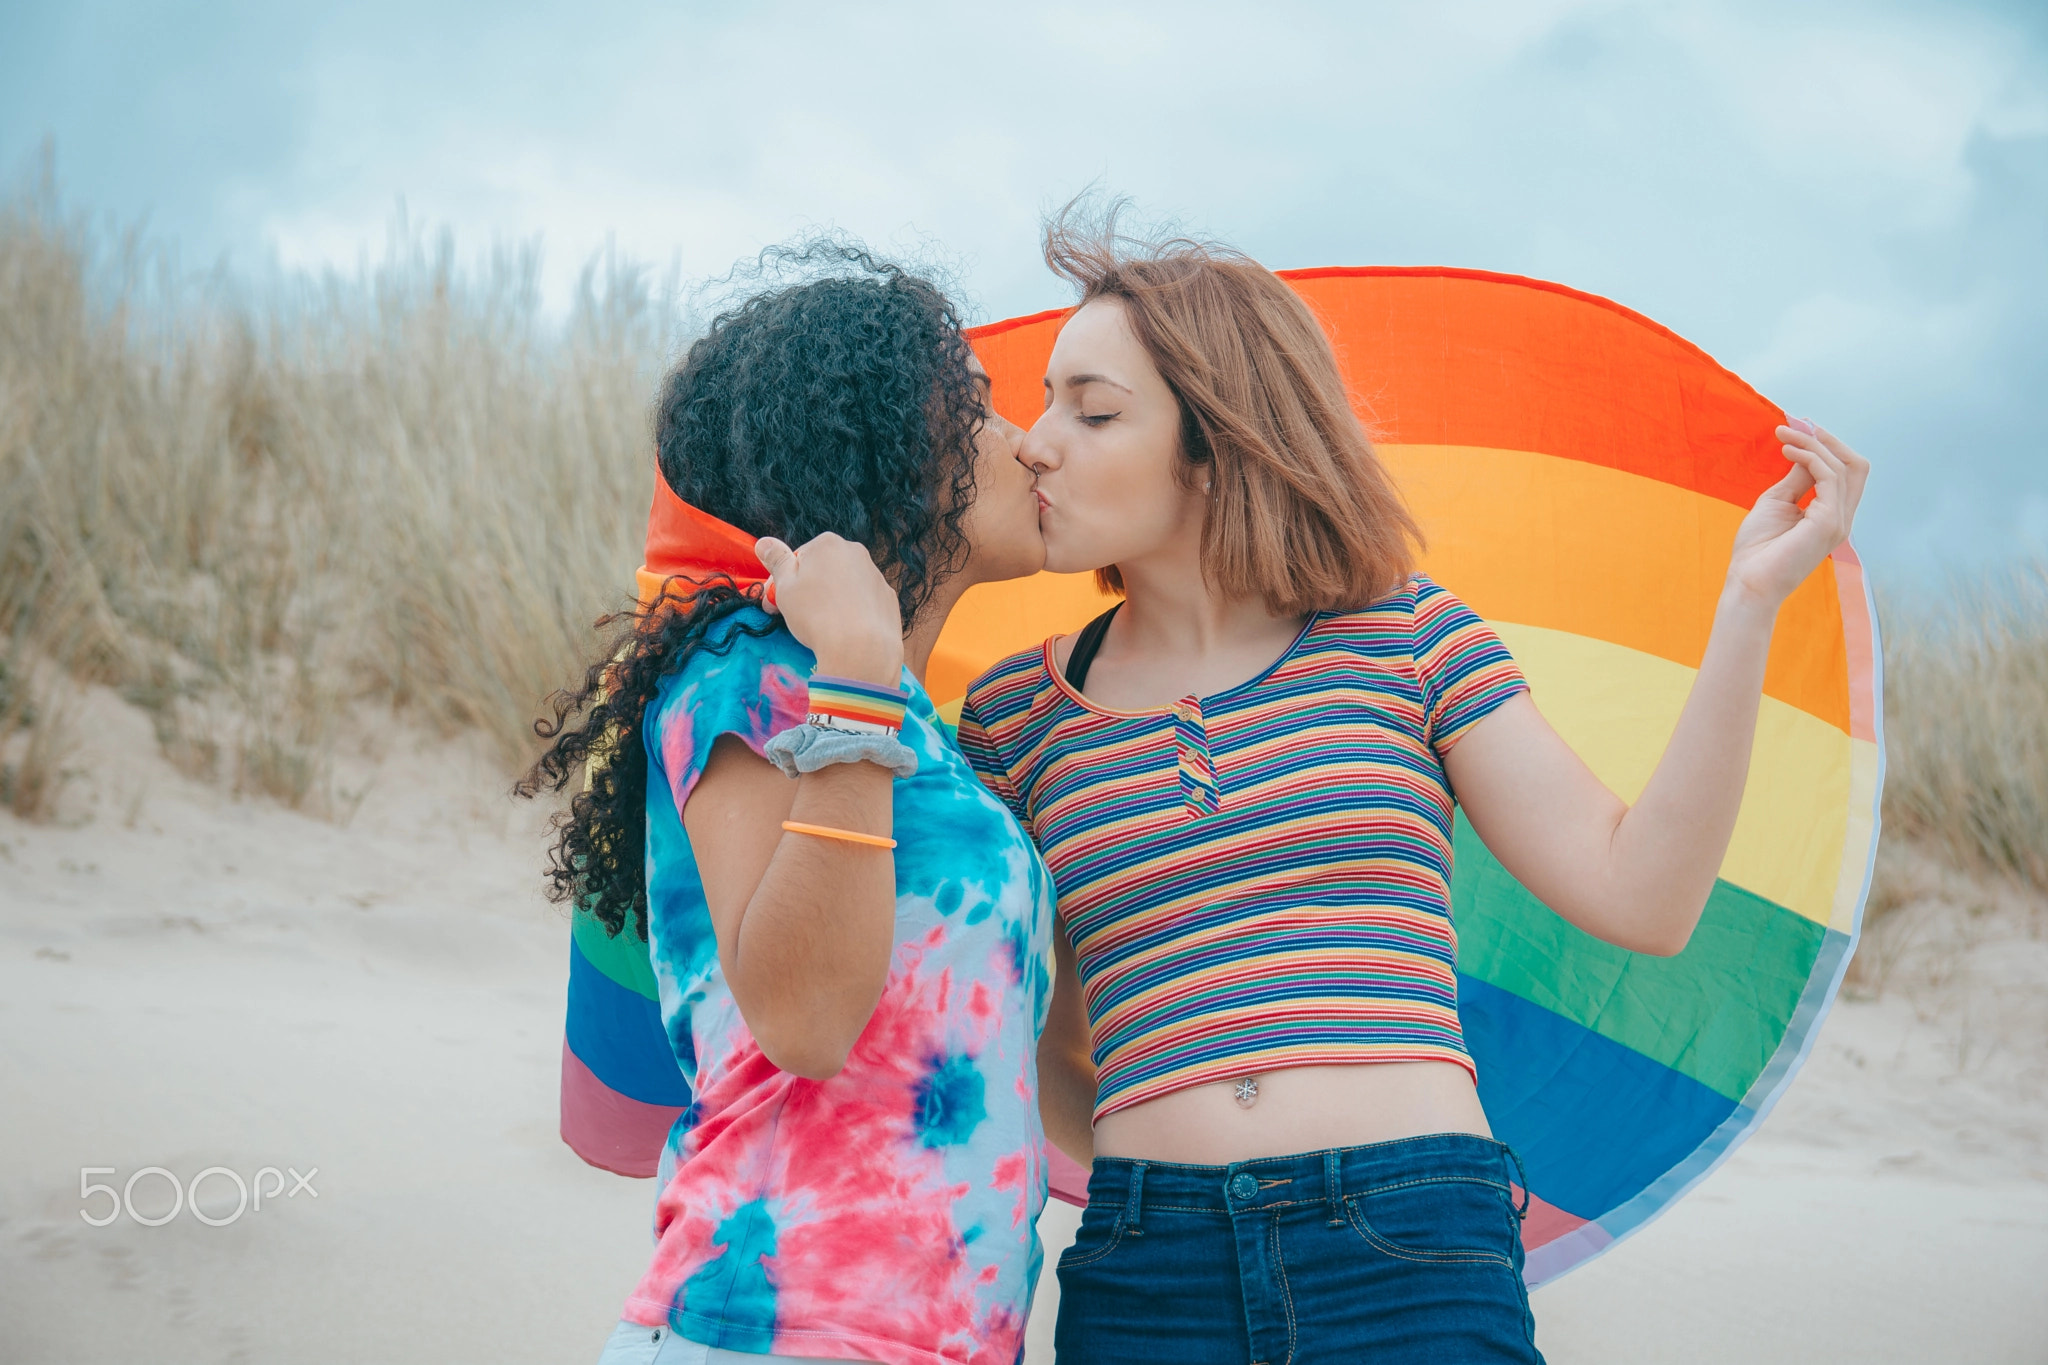 Kissing young Lesbian couple moving Gay Pride Flag on a sandy beach - Image